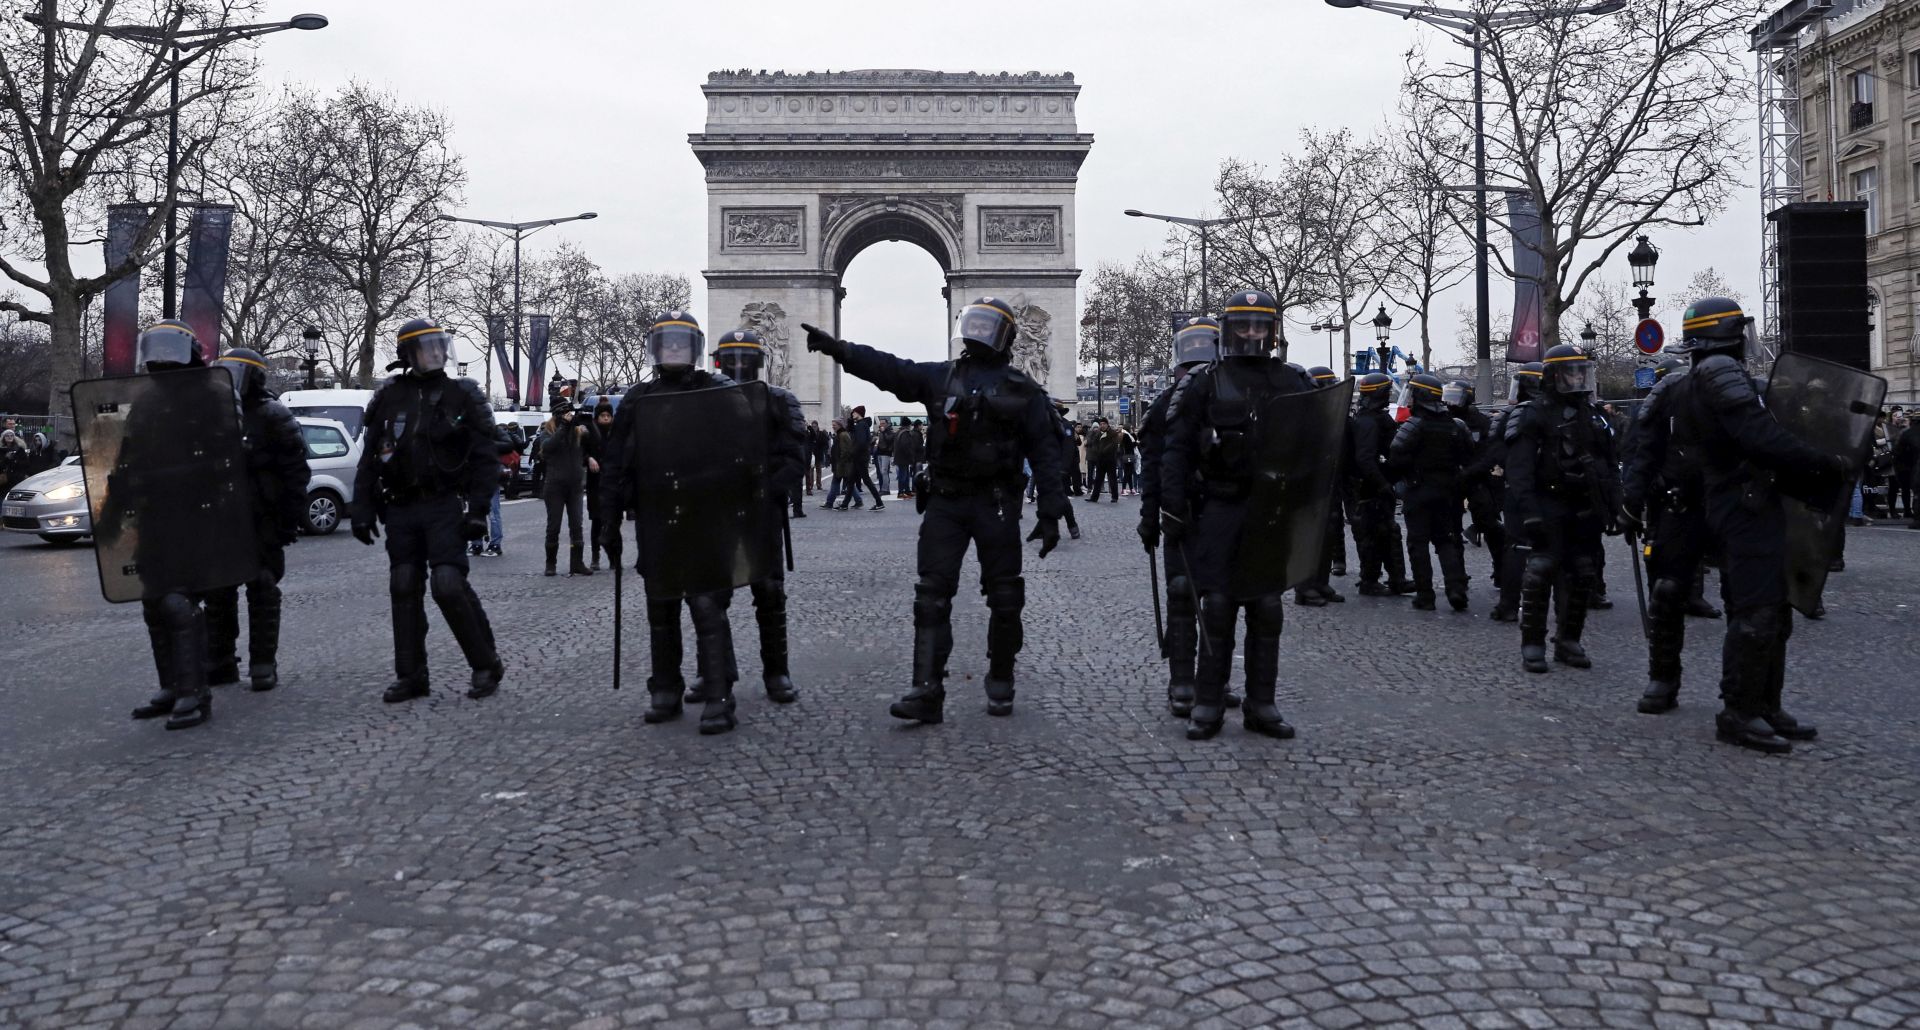 epa07253163 French riot police stand guard in front of Ardc de Triomphe during a 'Yellow Vests' protest in Paris, France, 29 December 2018. The so-called 'gilets jaunes' (yellow vests) is a protest movement, which reportedly has no political affiliation, that continues protests across the nation over high fuel prices. .  EPA/ETIENNE LAURENT